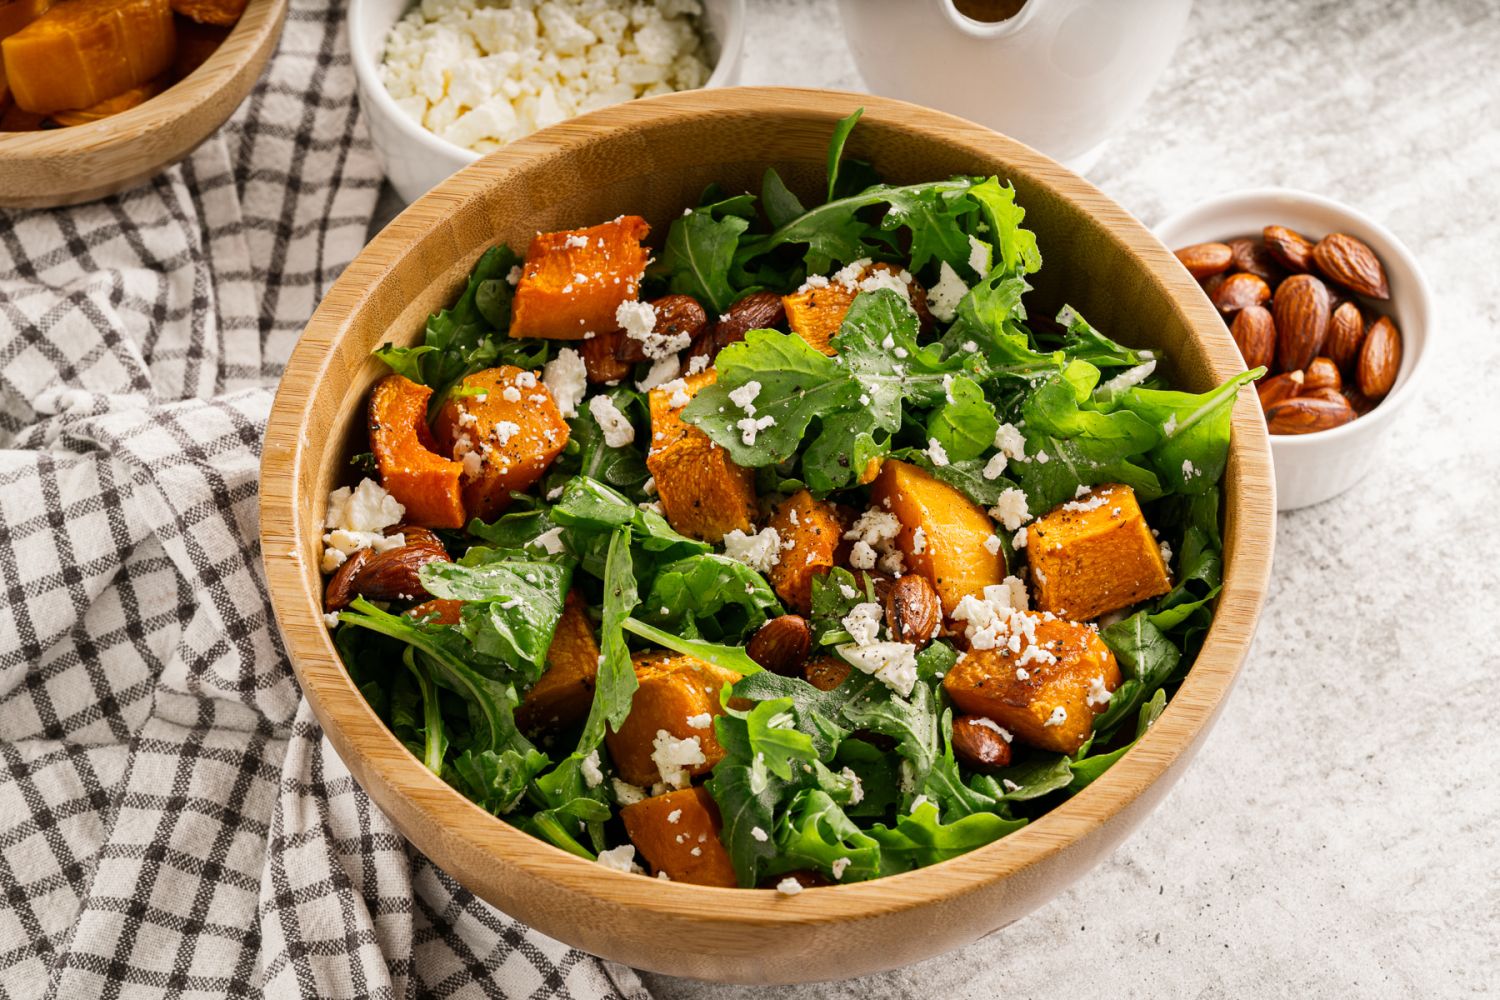 Arugula butternut squash with feta cheese and almonds in a wooden bowl with almonds on the side.